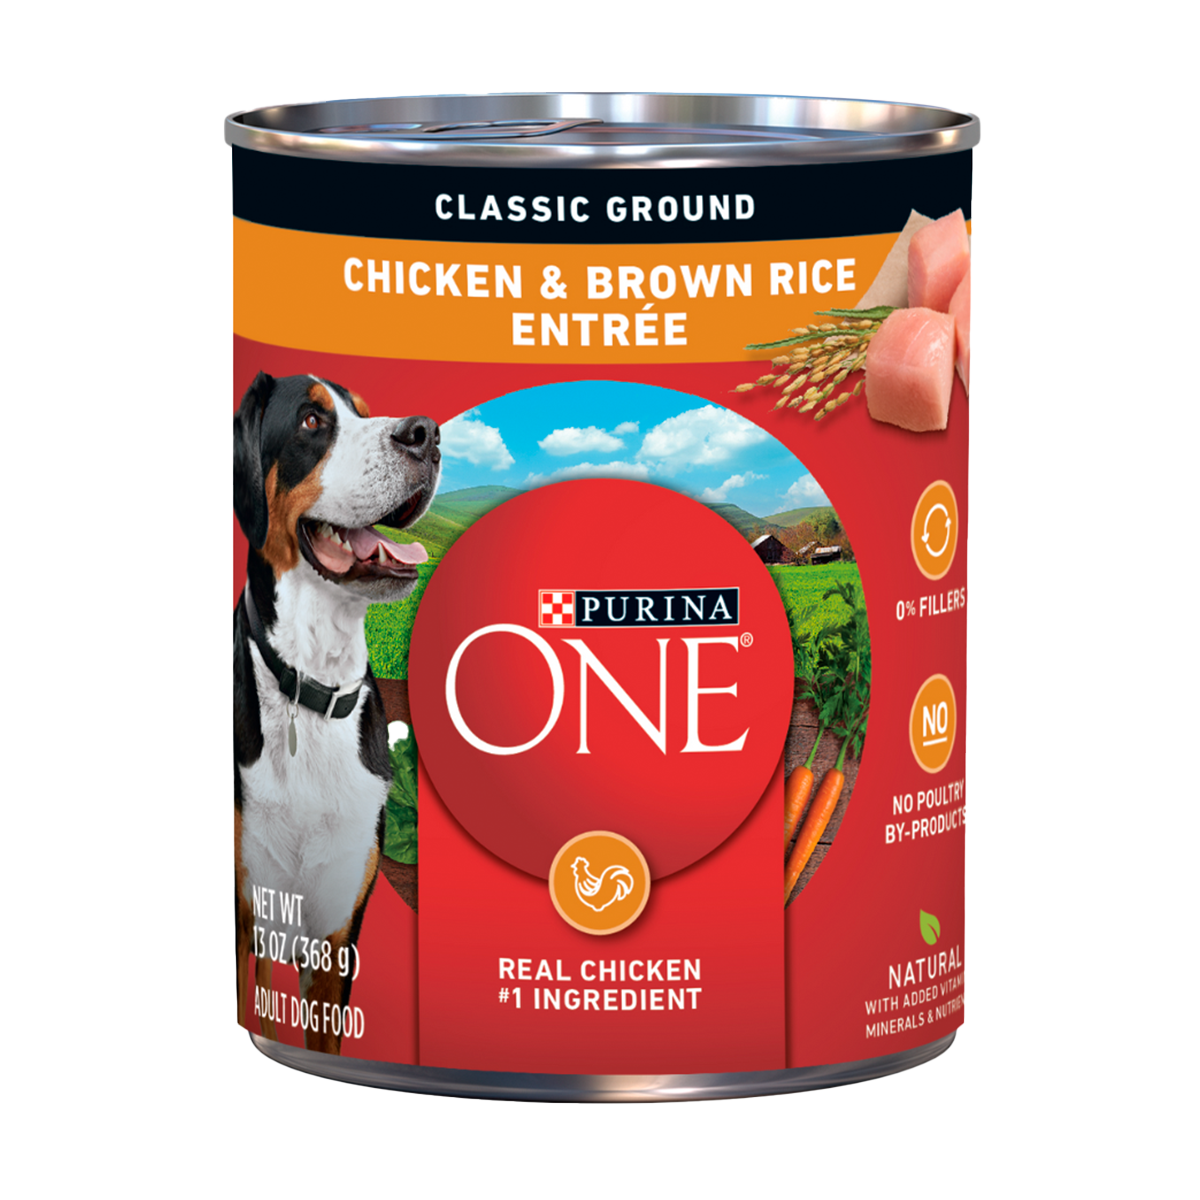 purina-one-wet-chicken-brown-rice-entr%C3%A9e-classic-ground.png